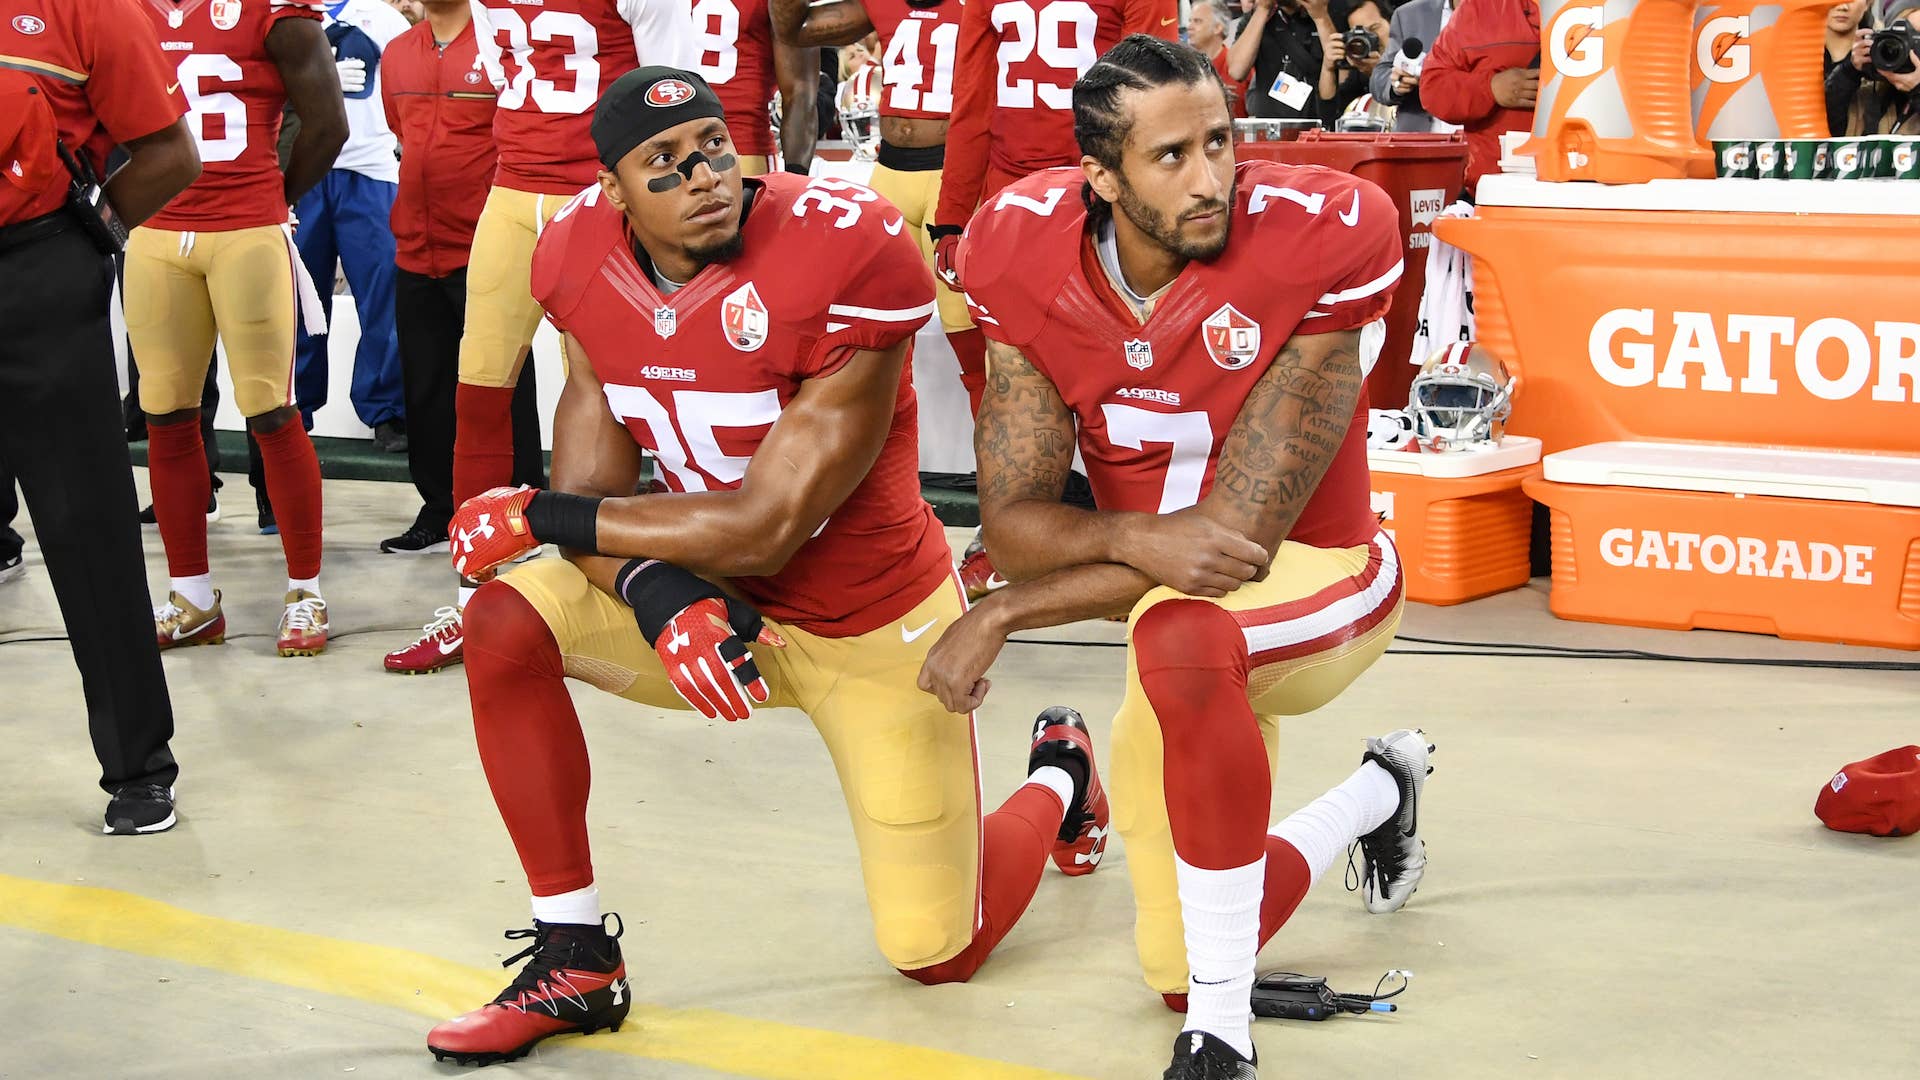 Colin Kaepernick and Eric Reid kneel in protest during the national anthem.